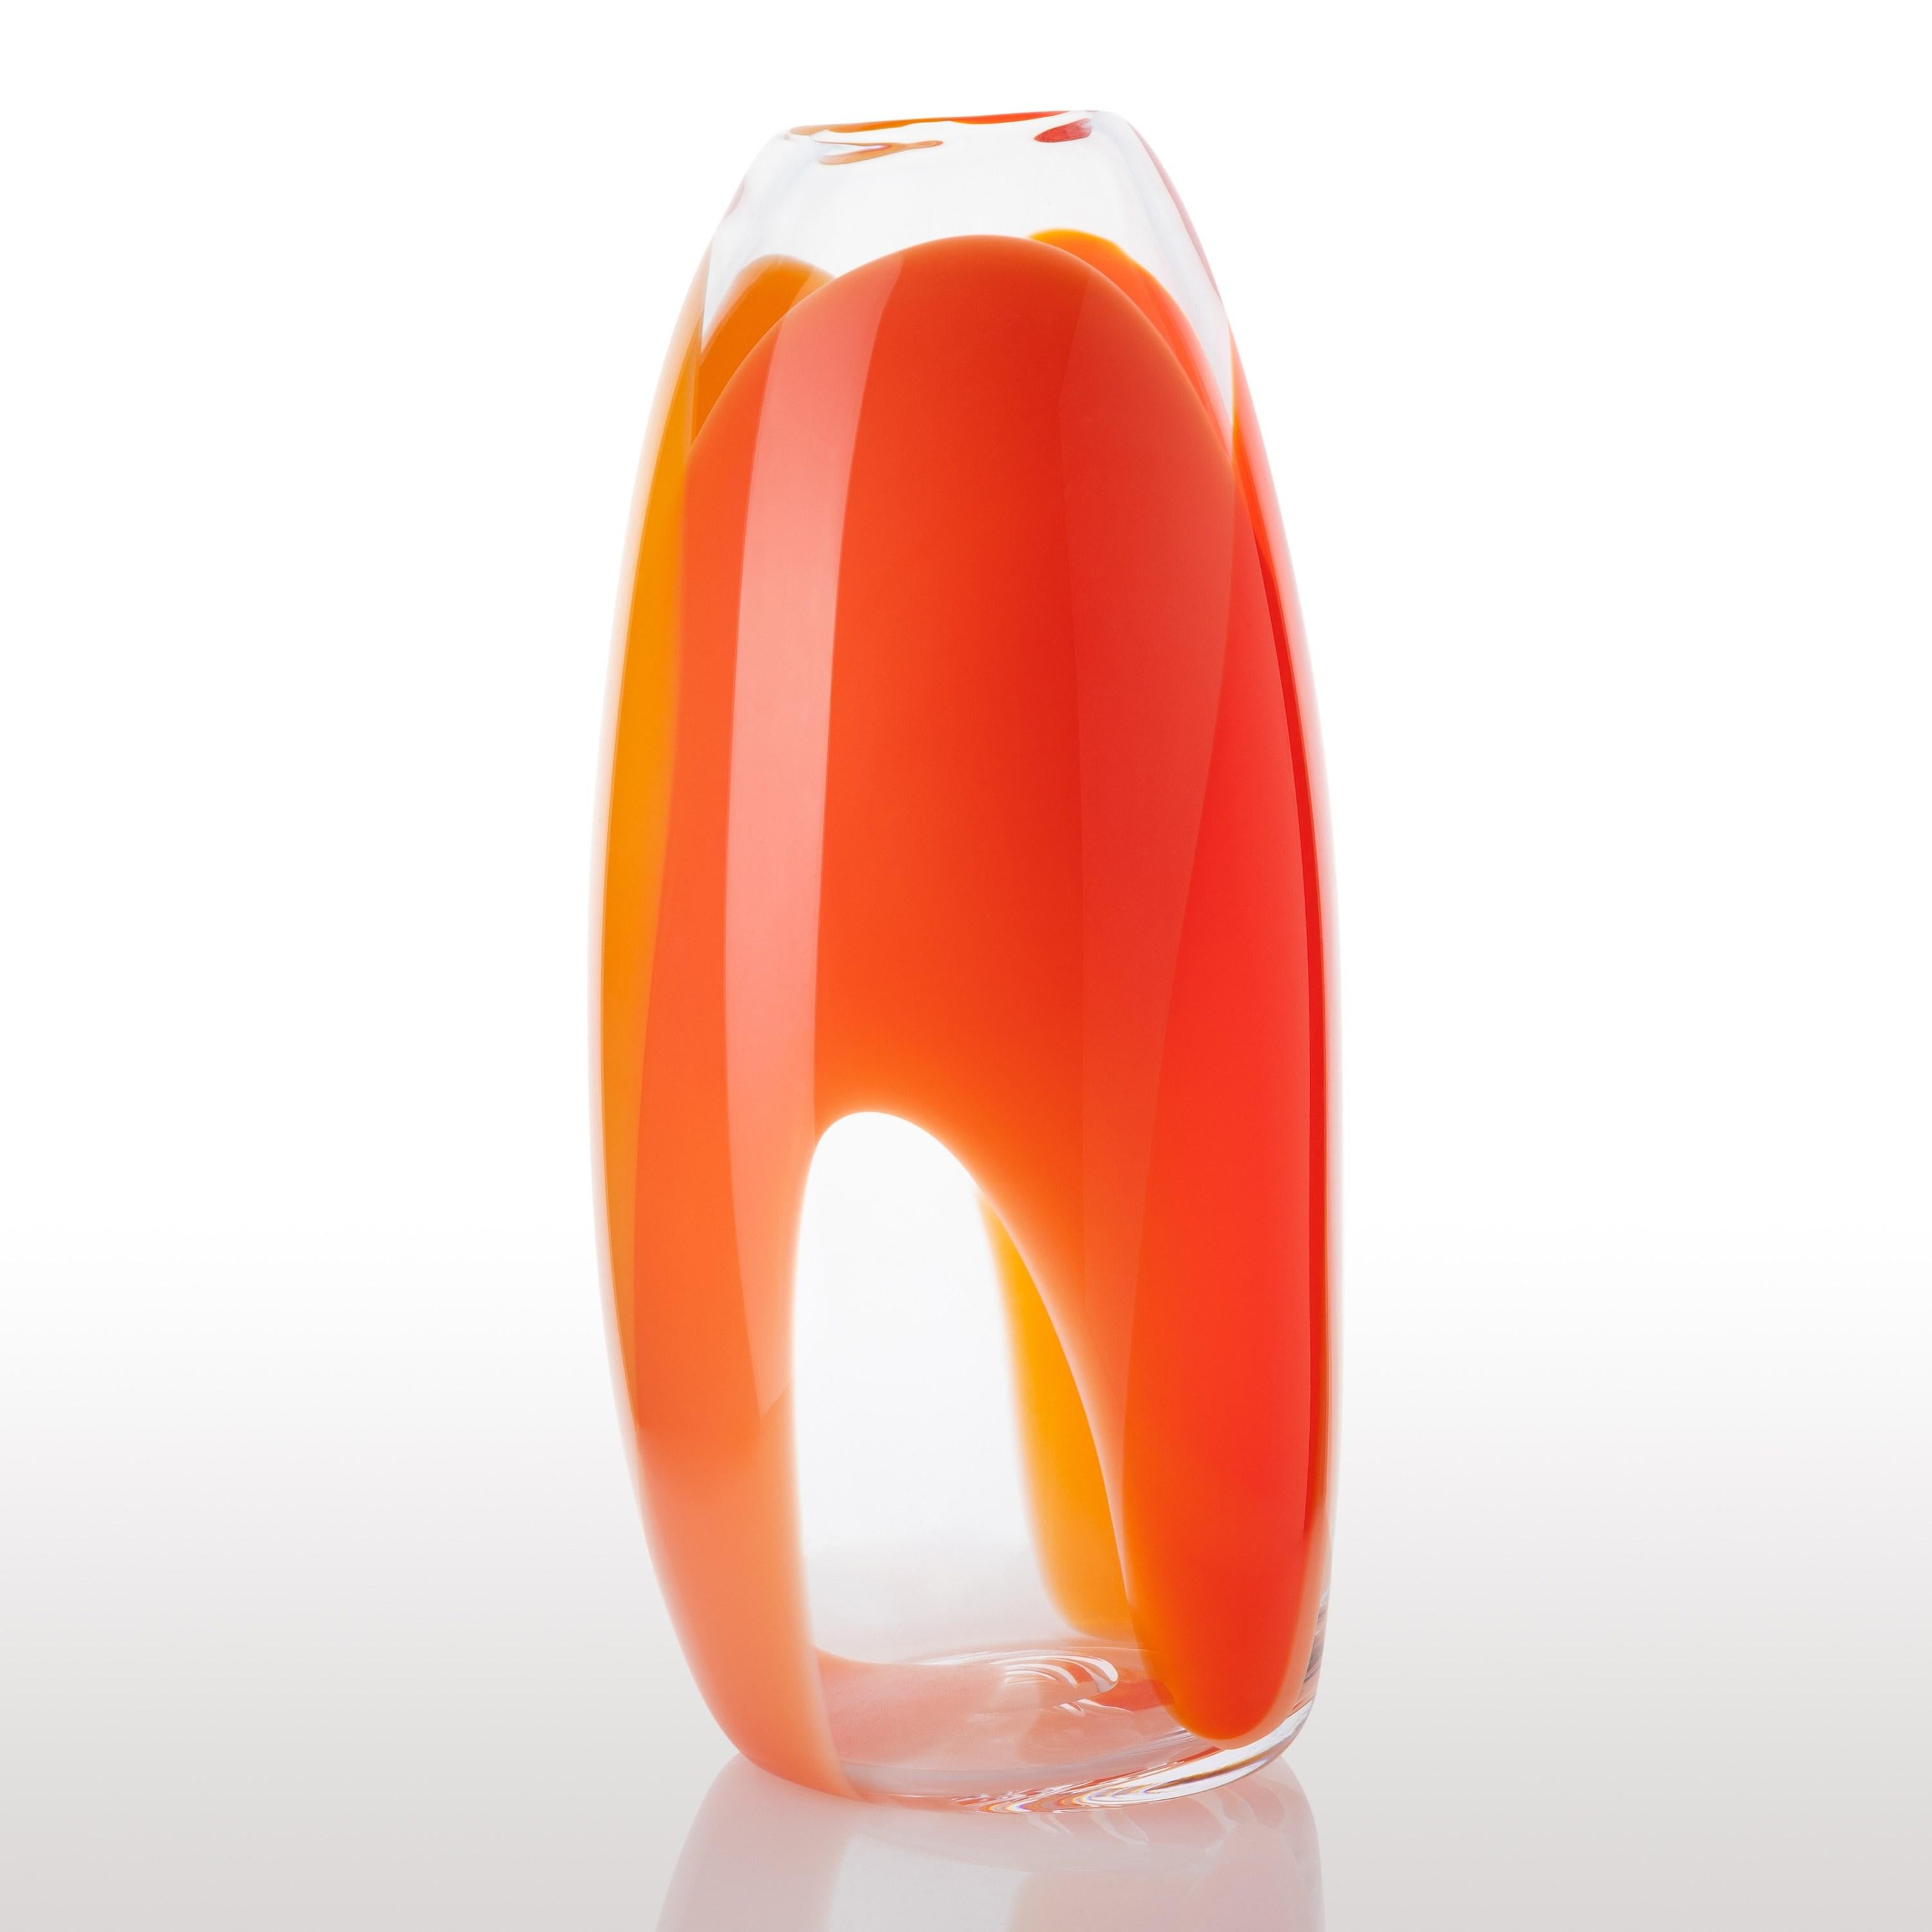 Organic Modern Waves No 466, clear, red & rich yellow abstract fluid glass vase by Neil Wilkin For Sale